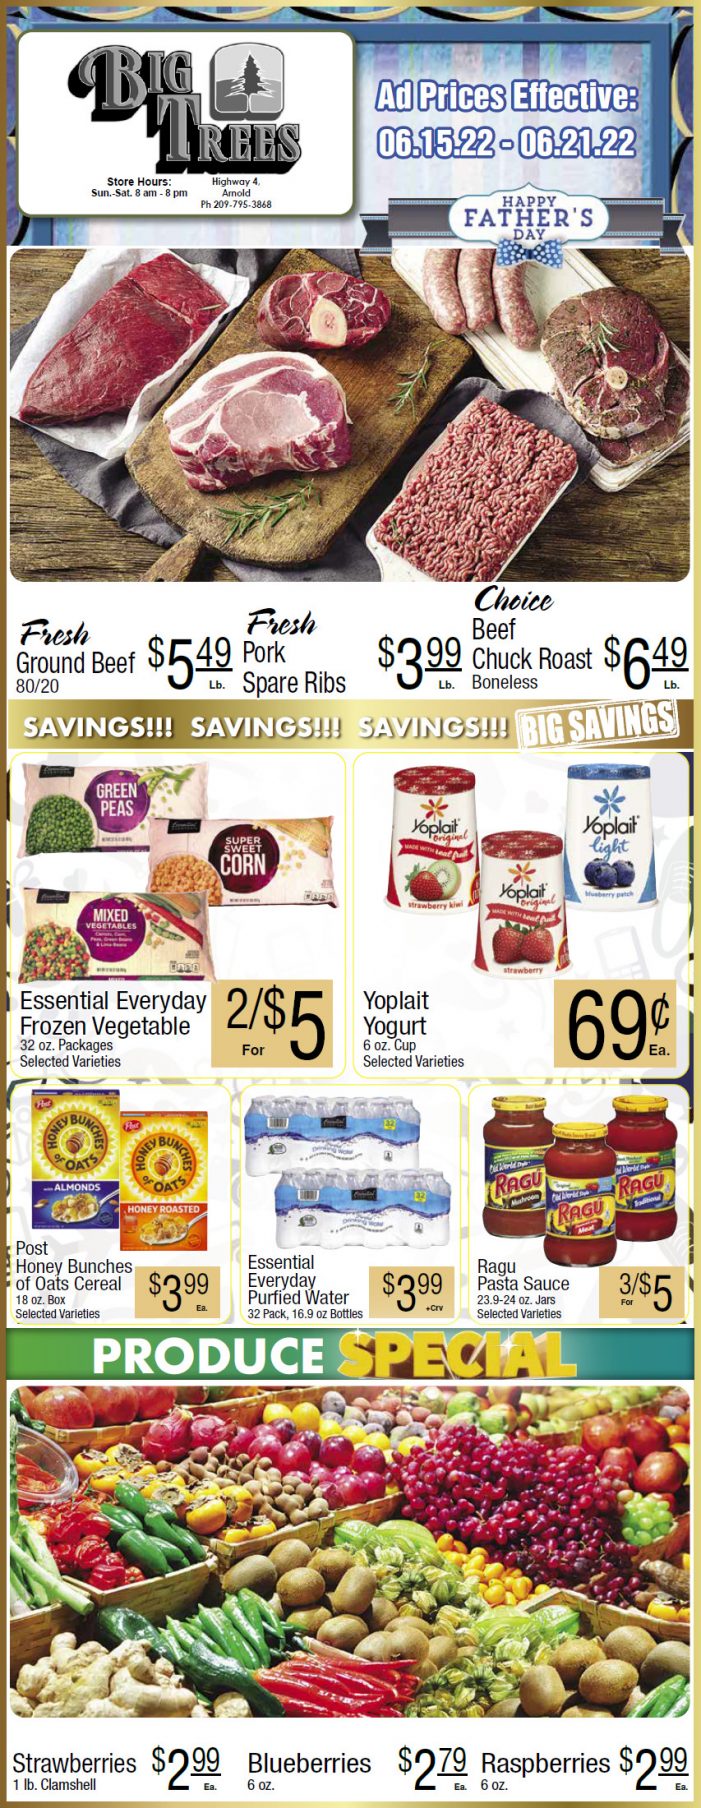 Big Trees Market Weekly Ad & Grocery Specials June 15 – 21!  Shop Local & Save for Father’s Day!!